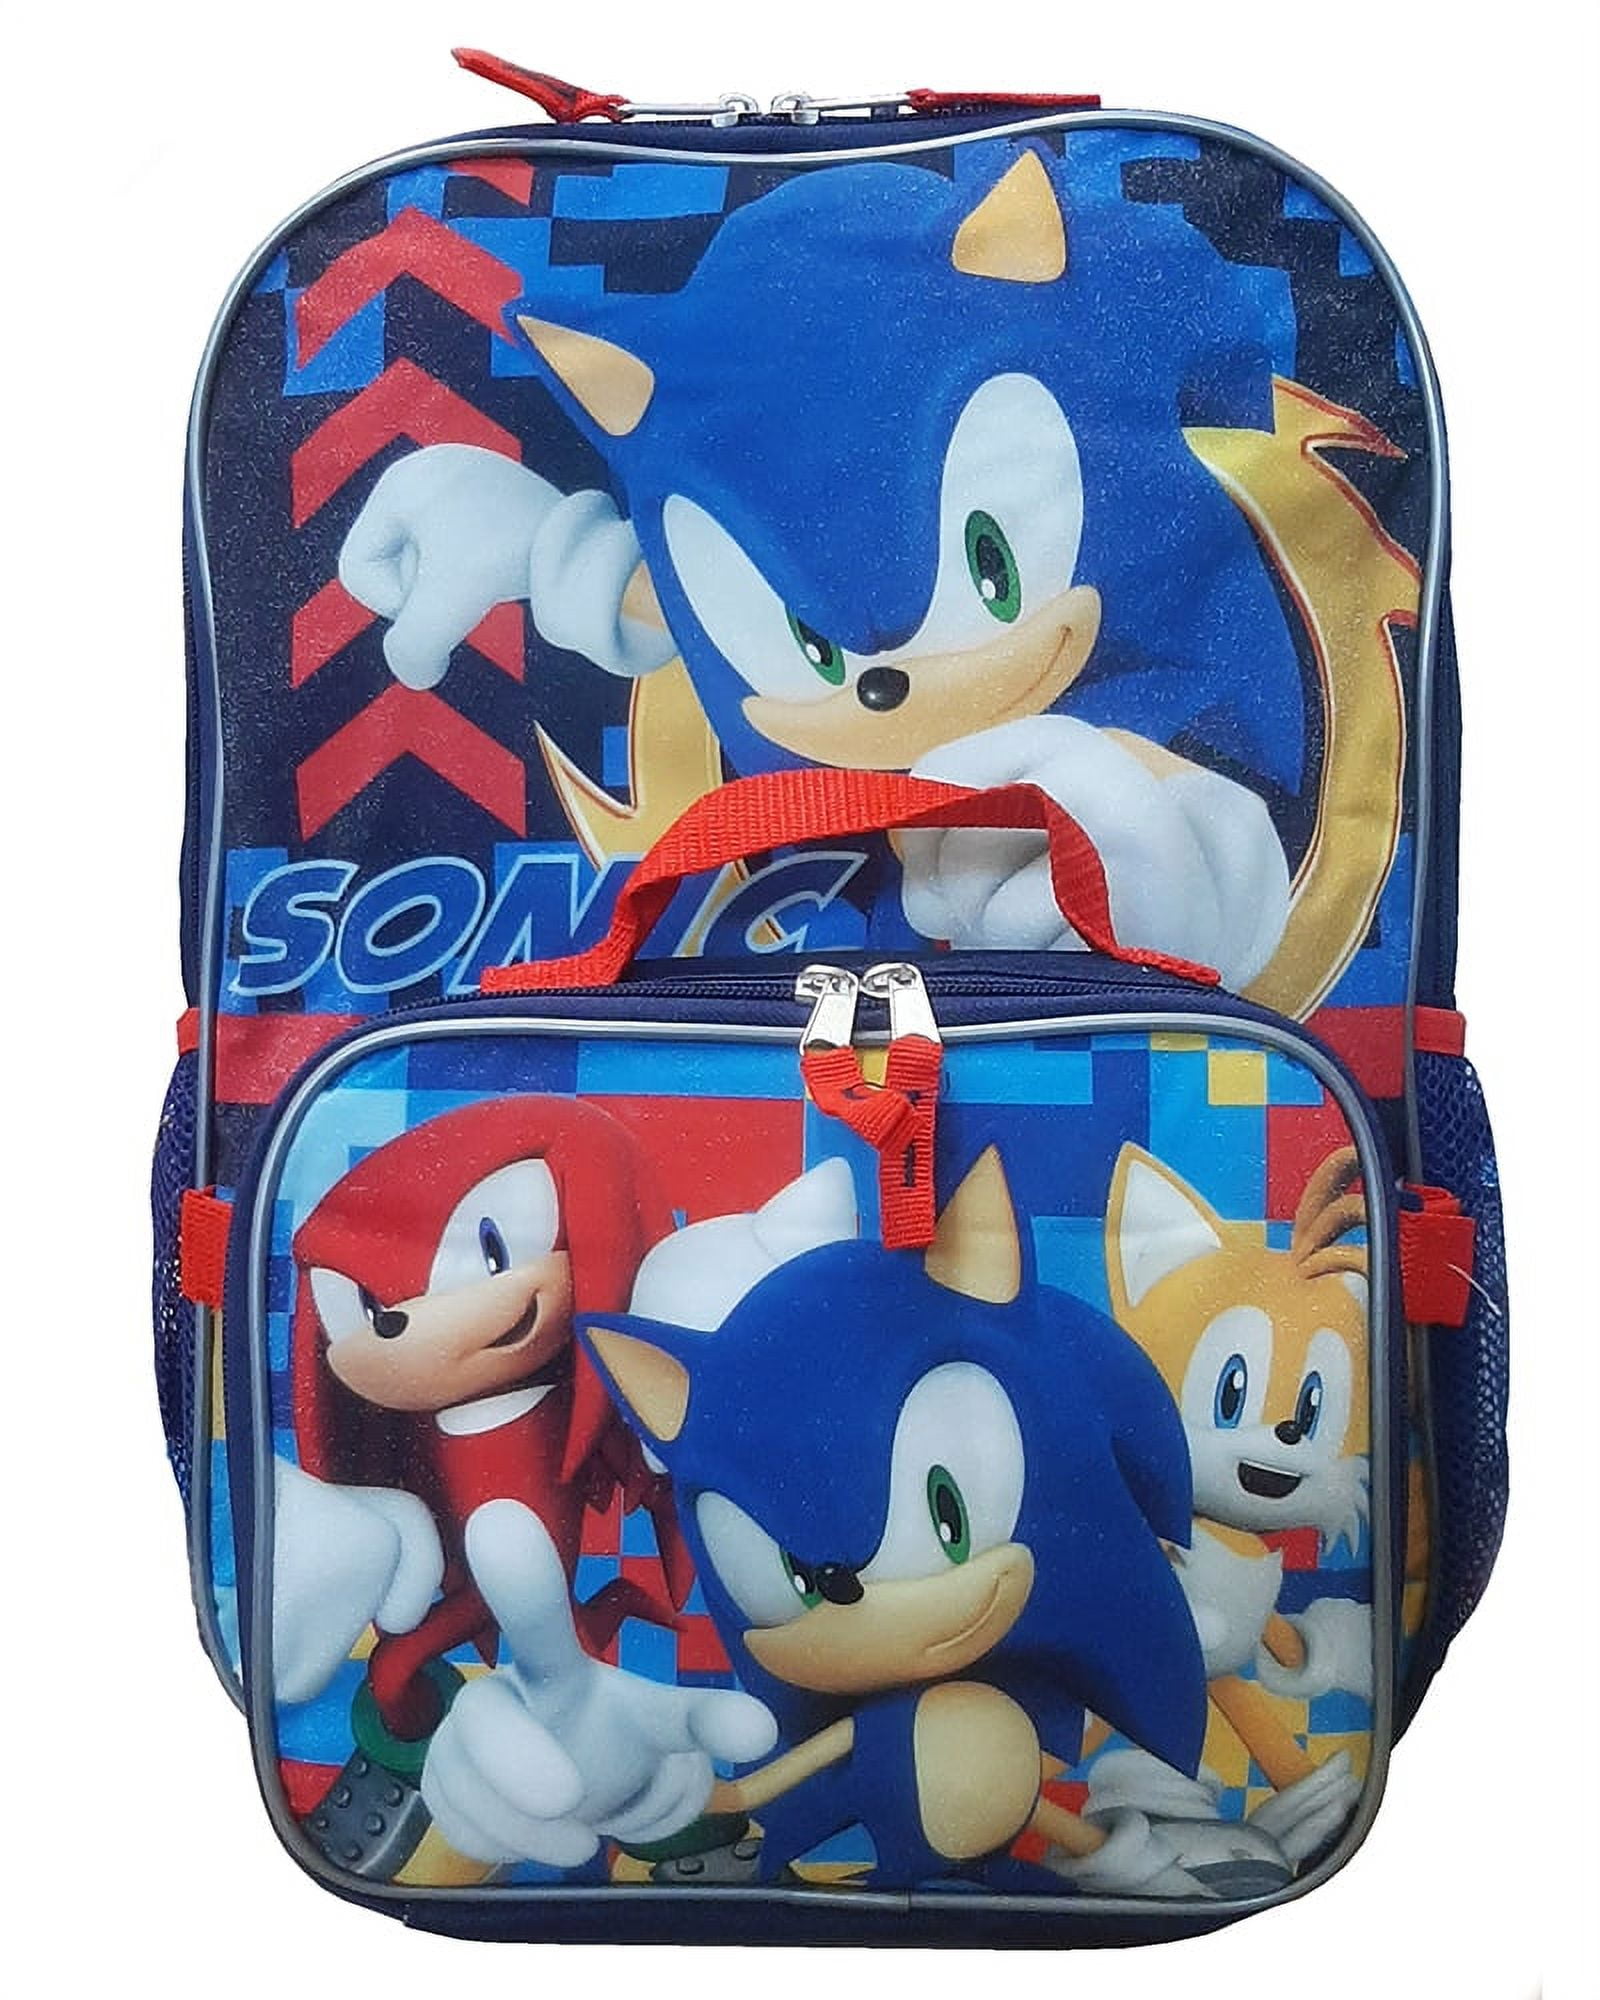 Accessories, Brand New Sonic Lunch Box